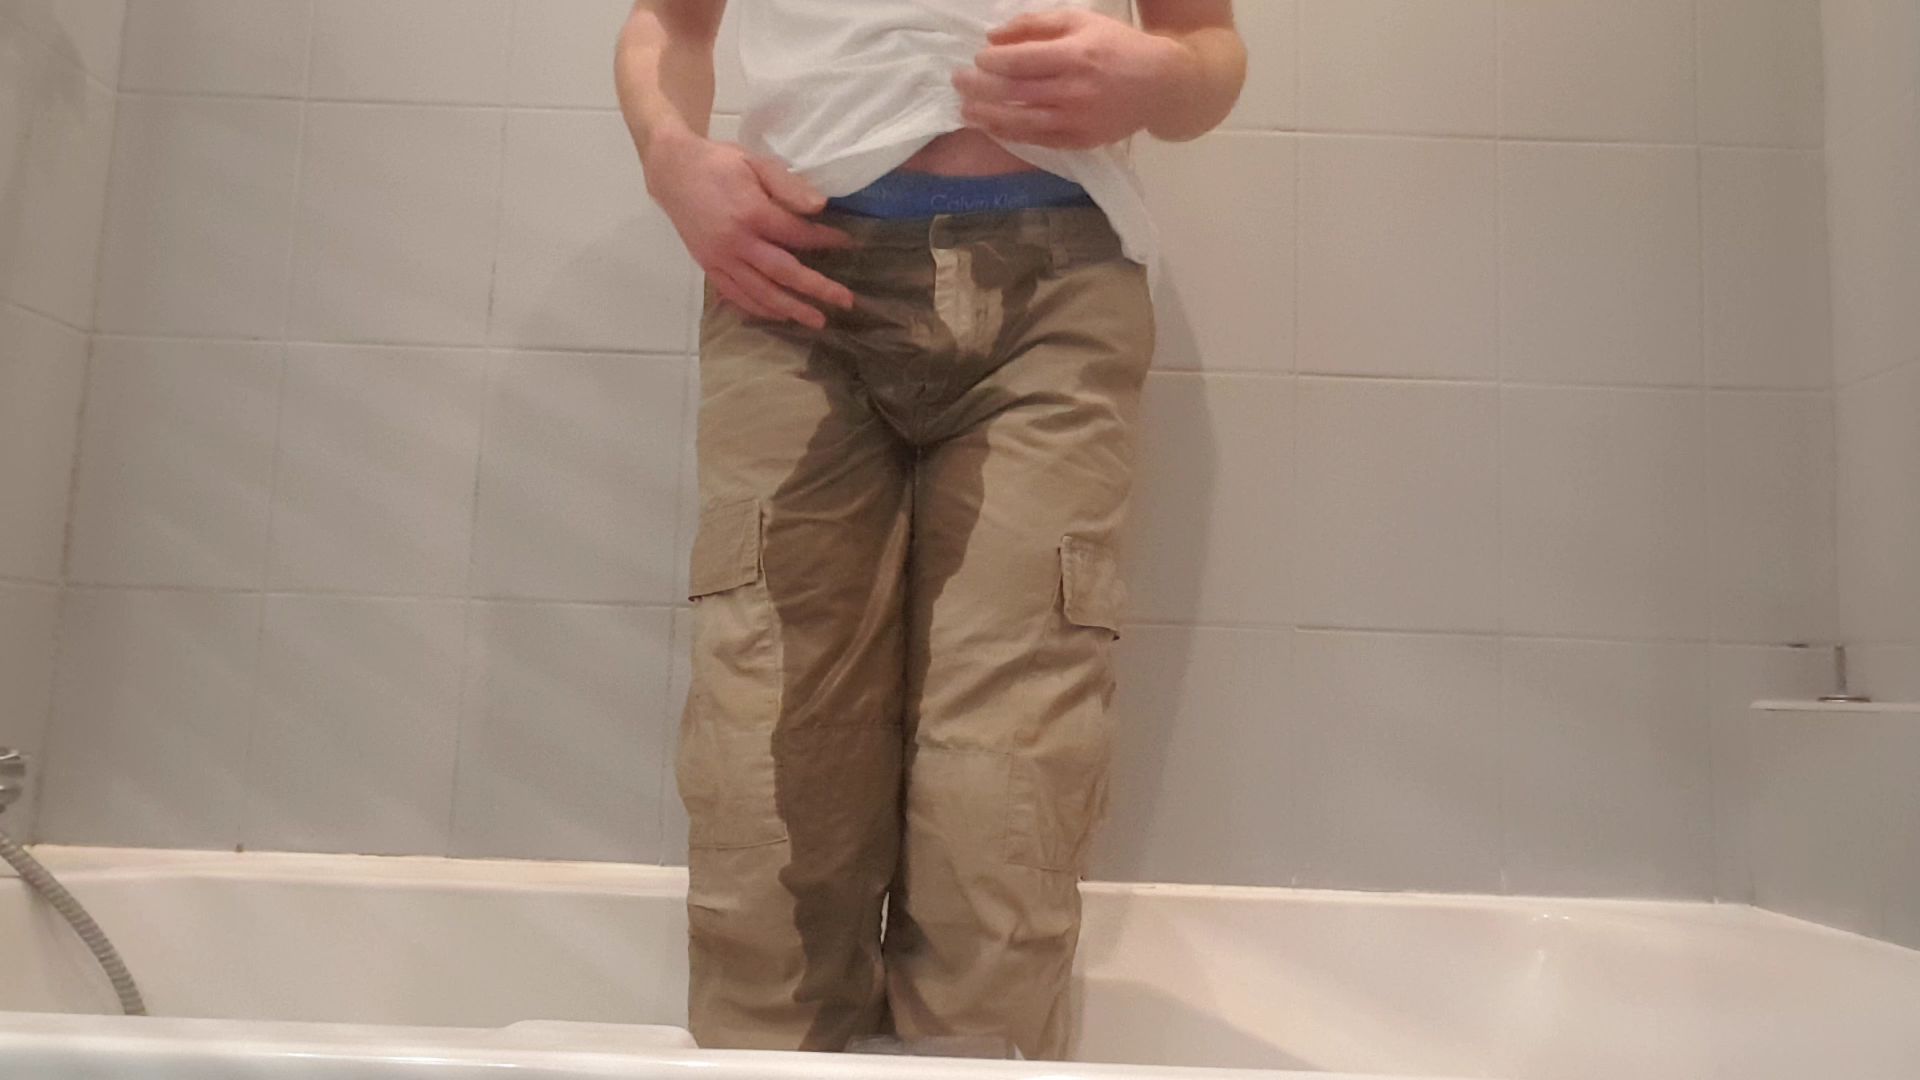 Pissing myself in cargo pants